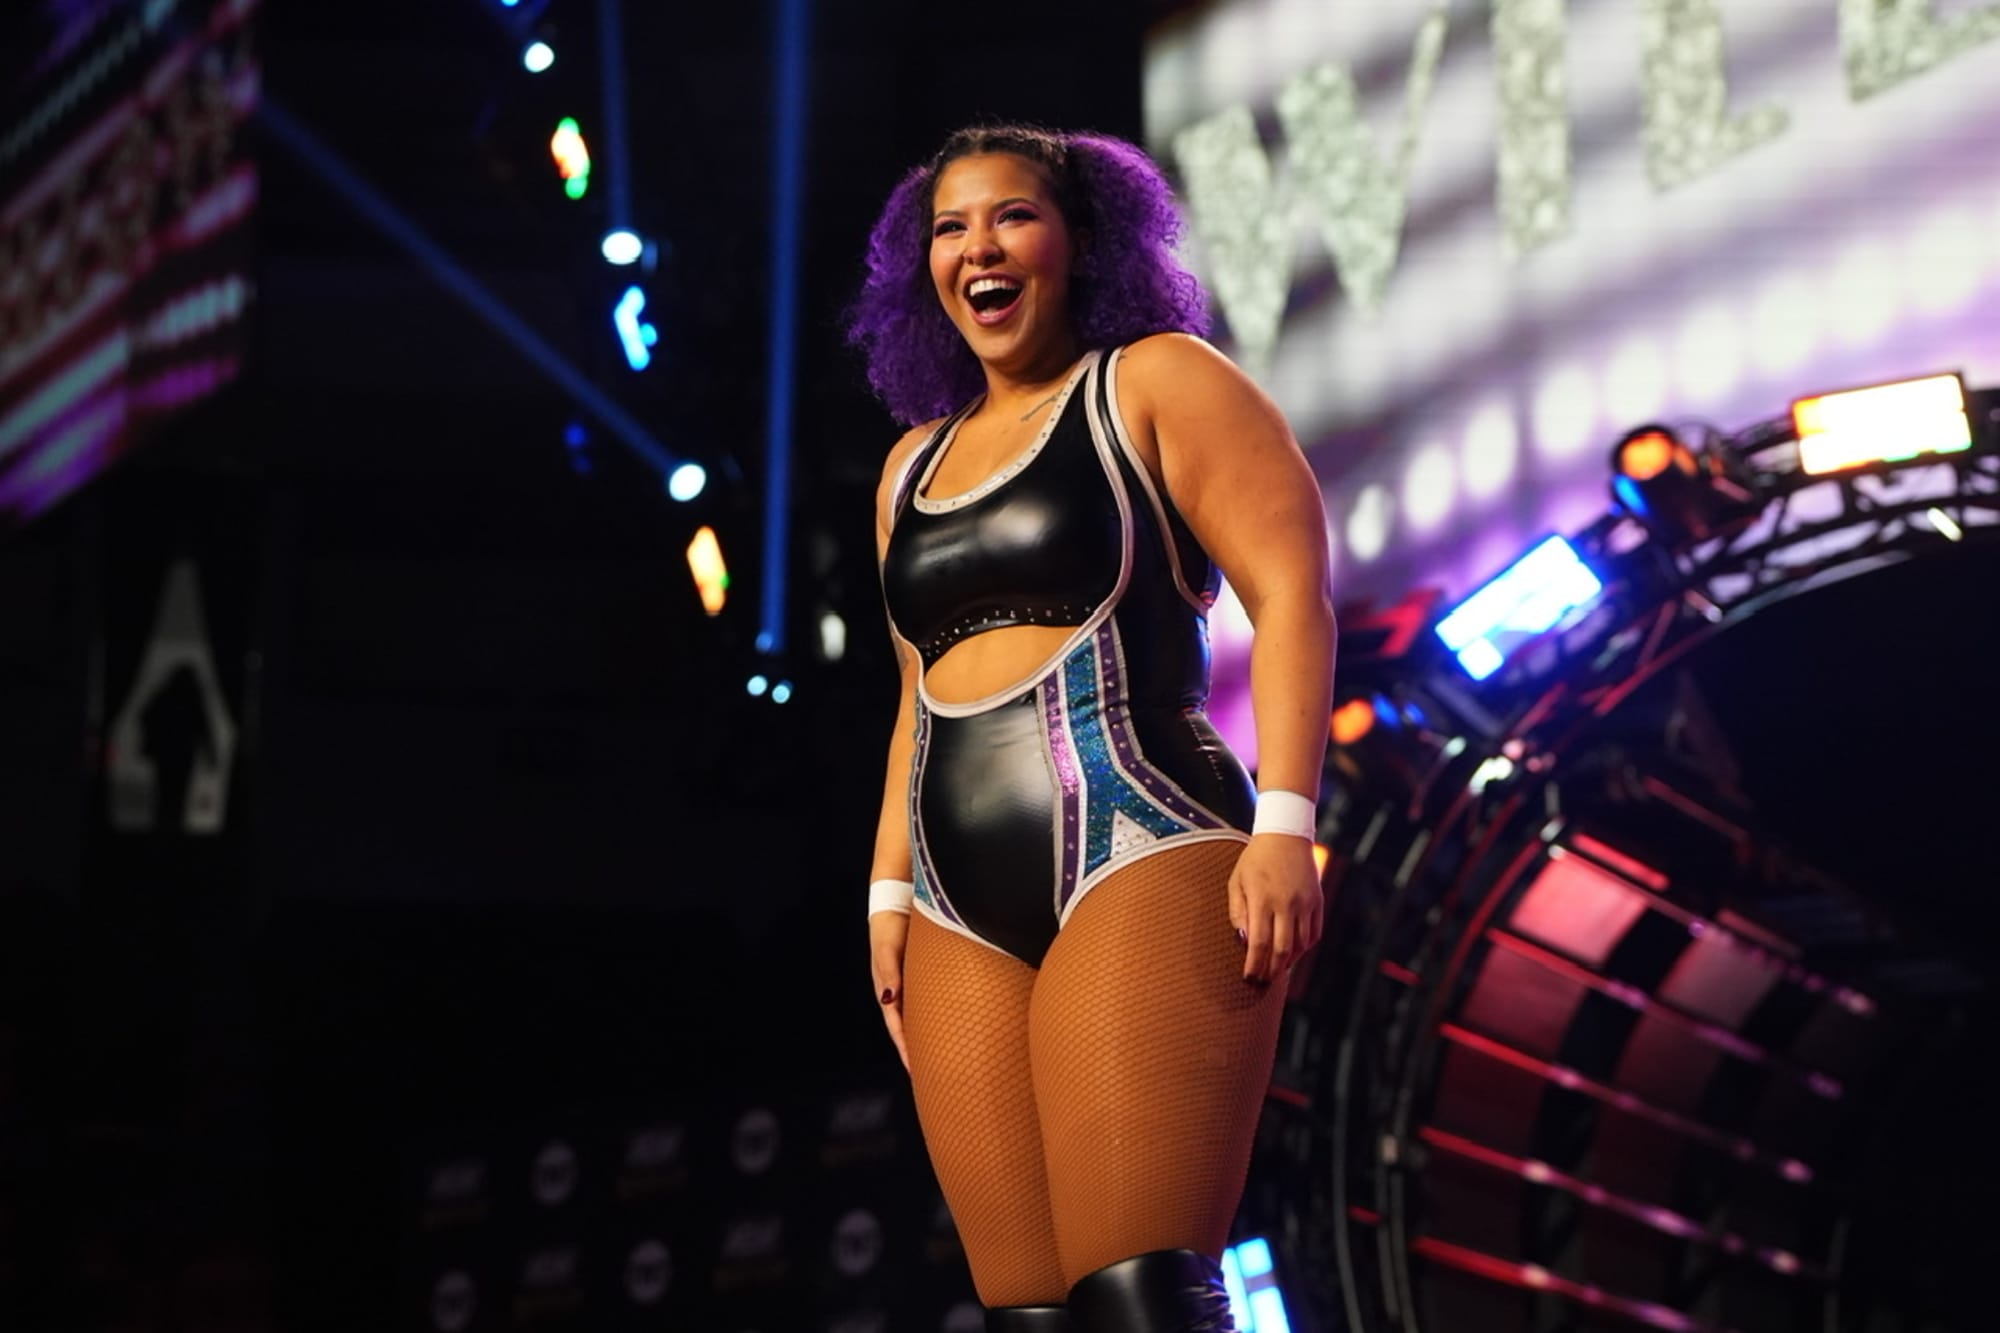 Willow Nightingale reflects on AEW TV debut, talks ROH, 2019 neck injury